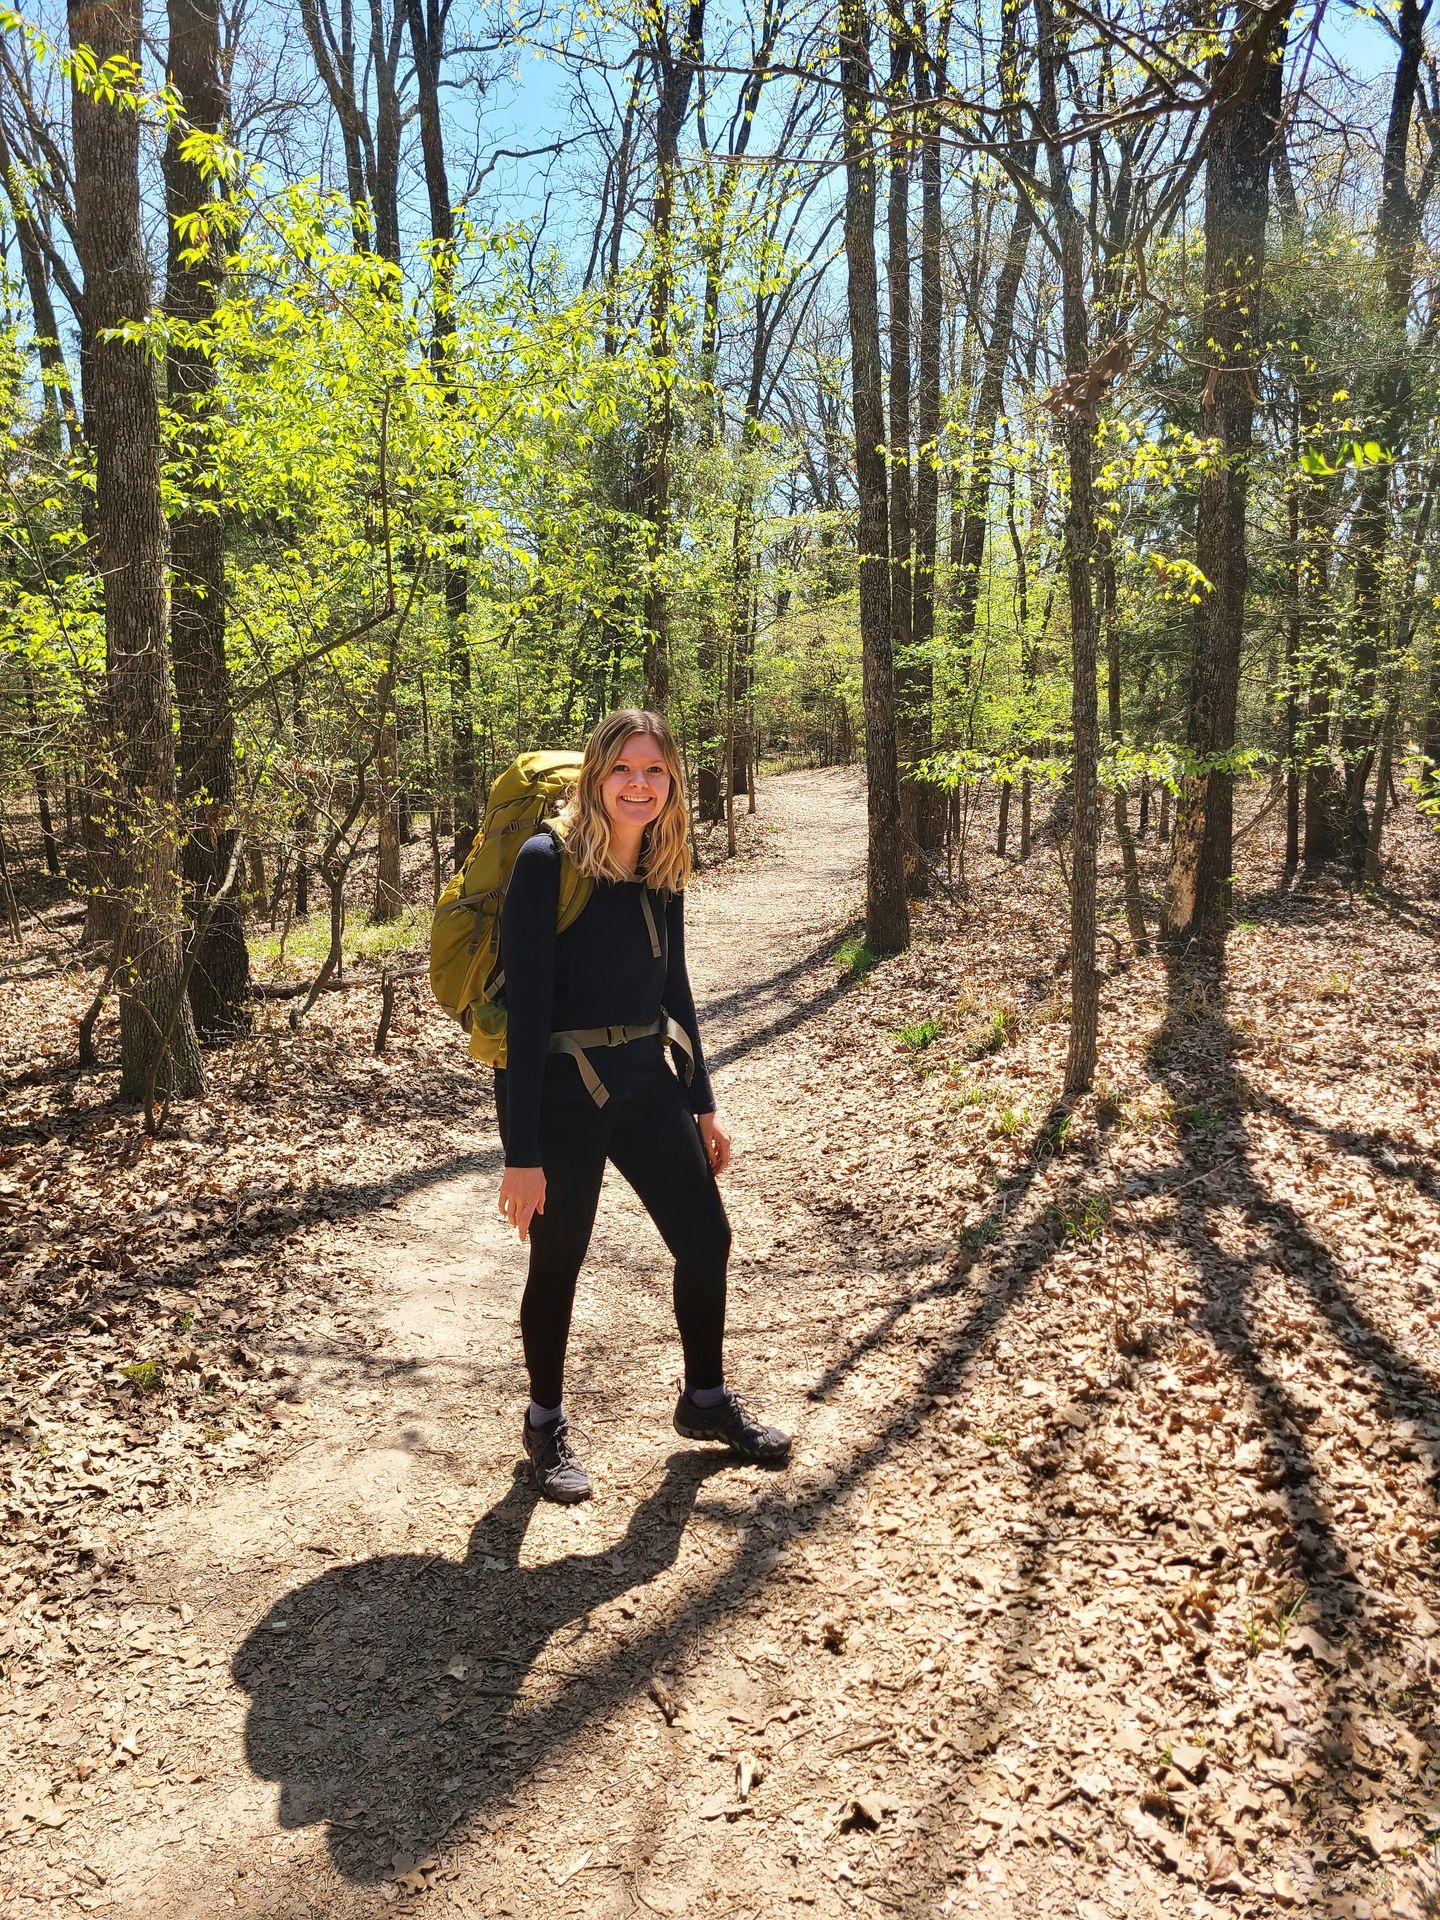 Lydia wearing black and standing on a trail with a yellow backpack.